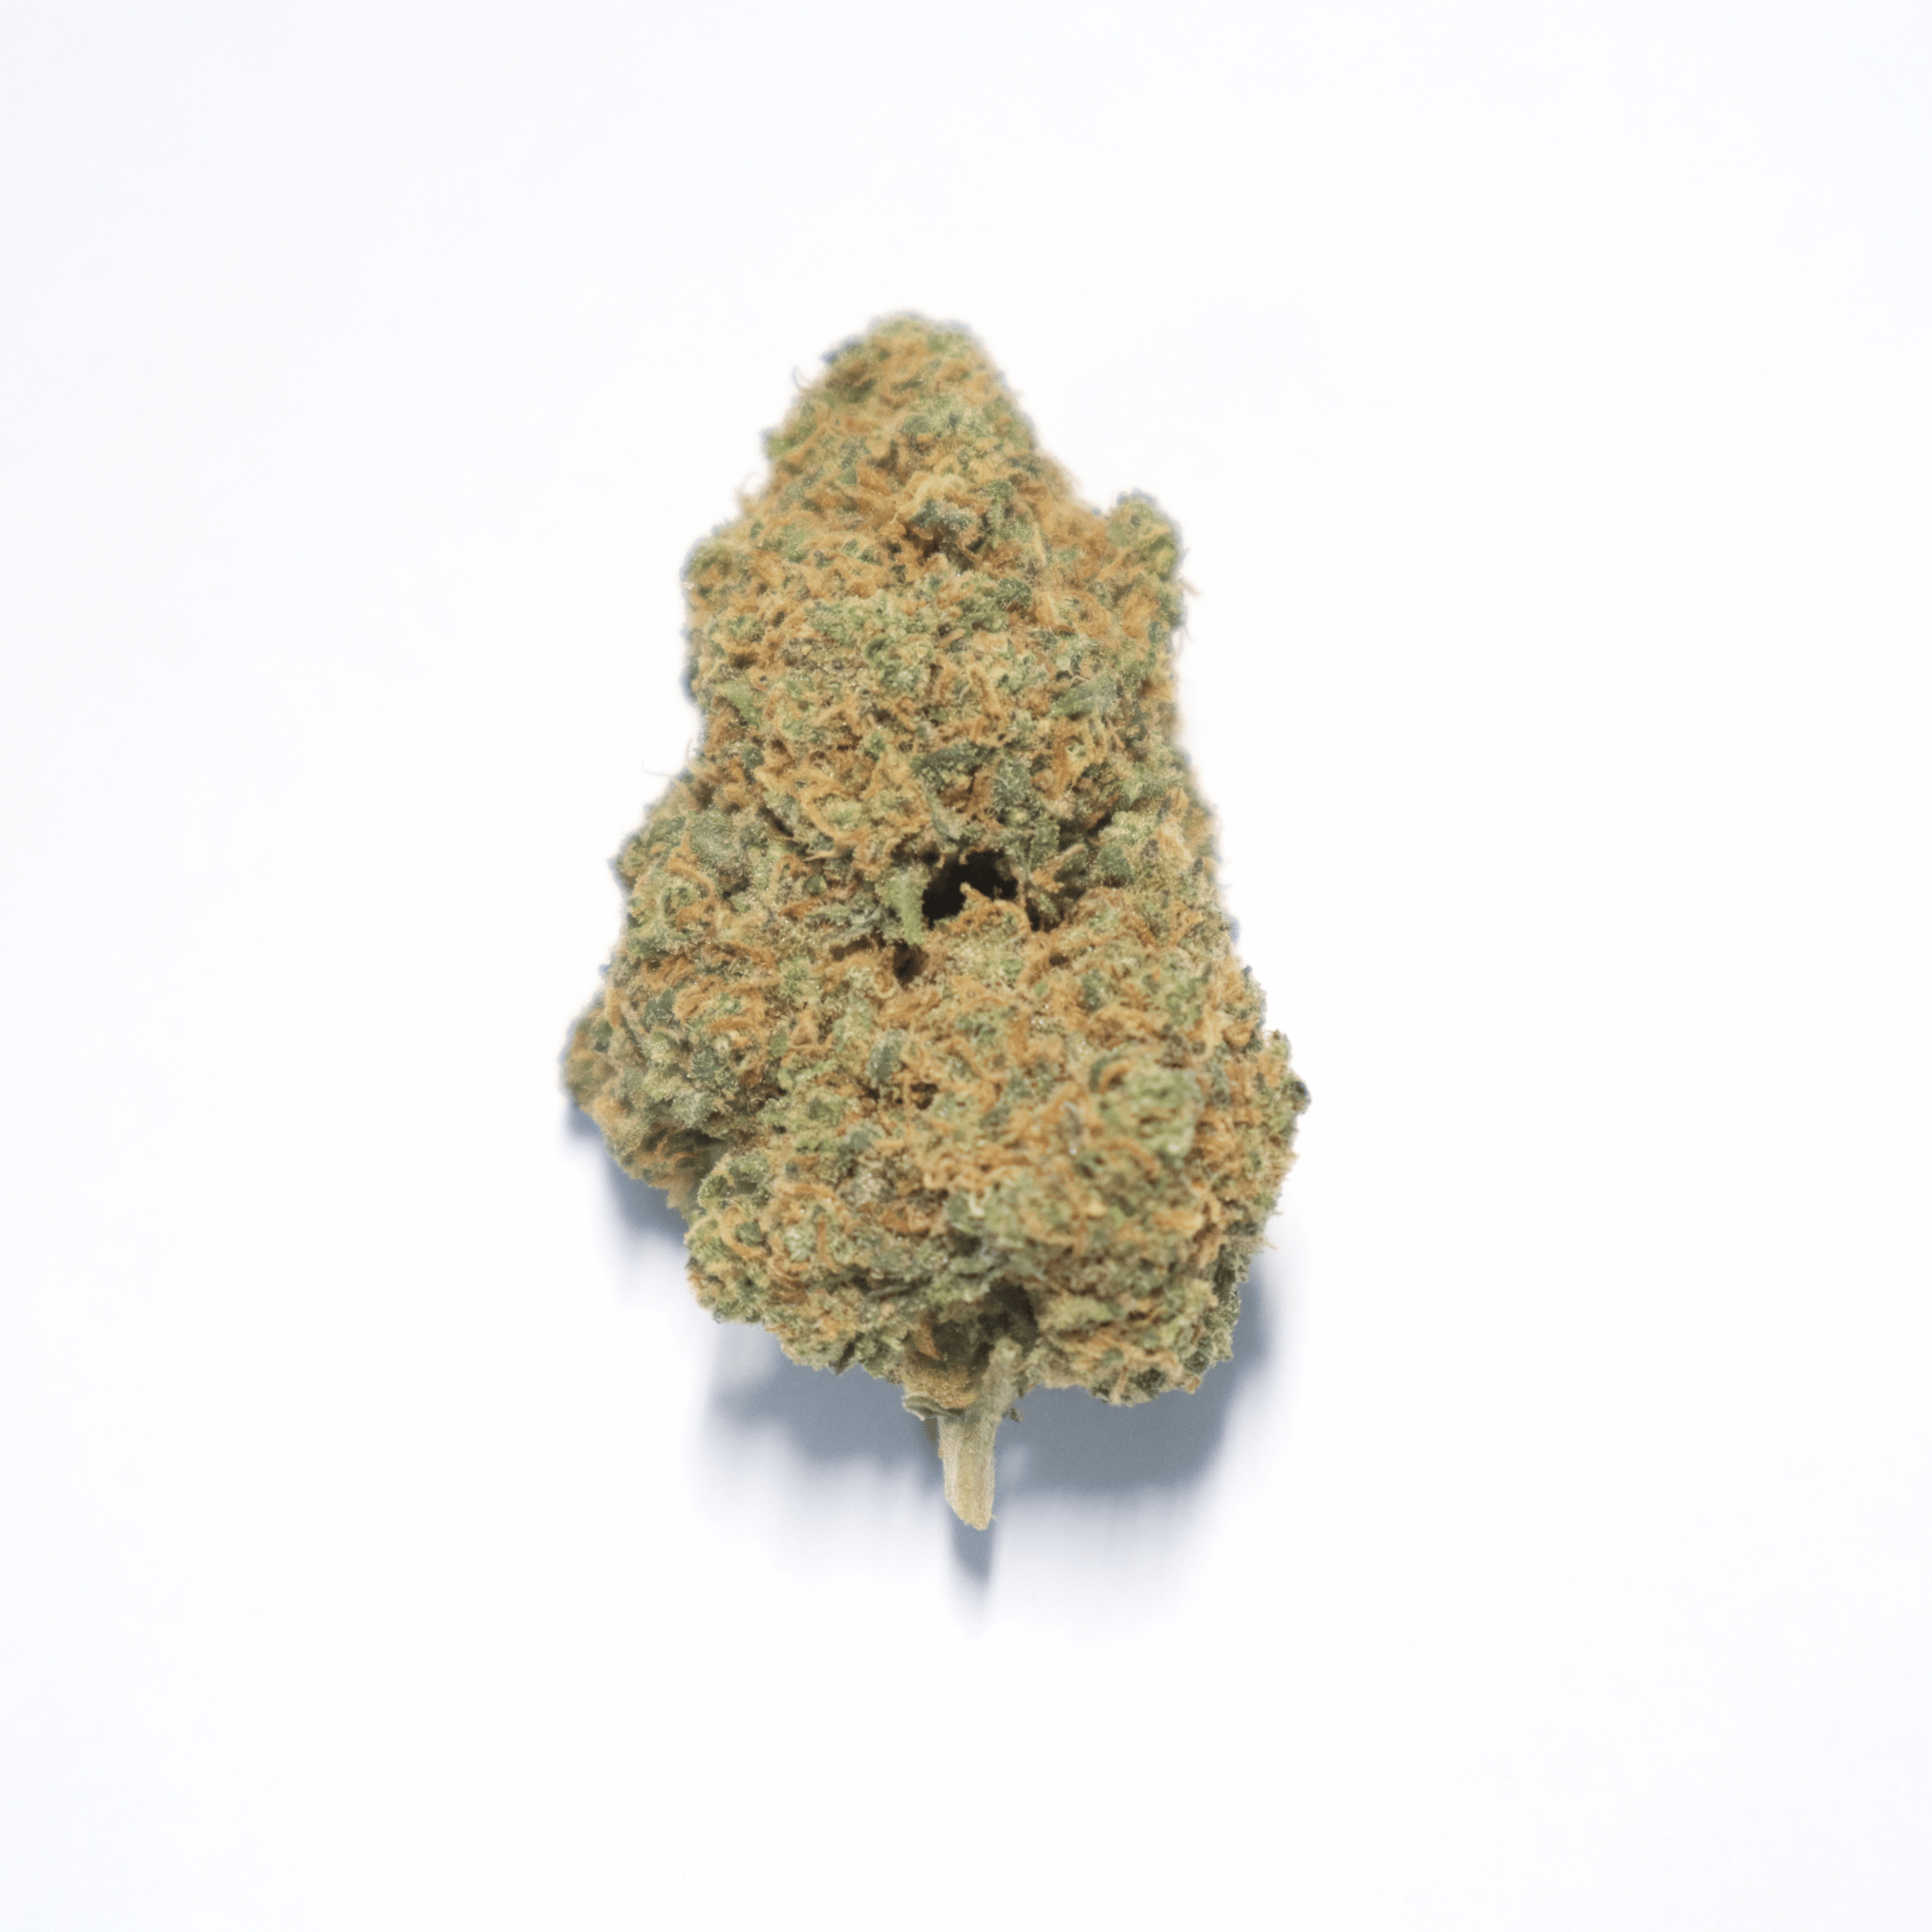 Buy CBD Flowers online in the UK from Graded Green - Delivery with 24 hours